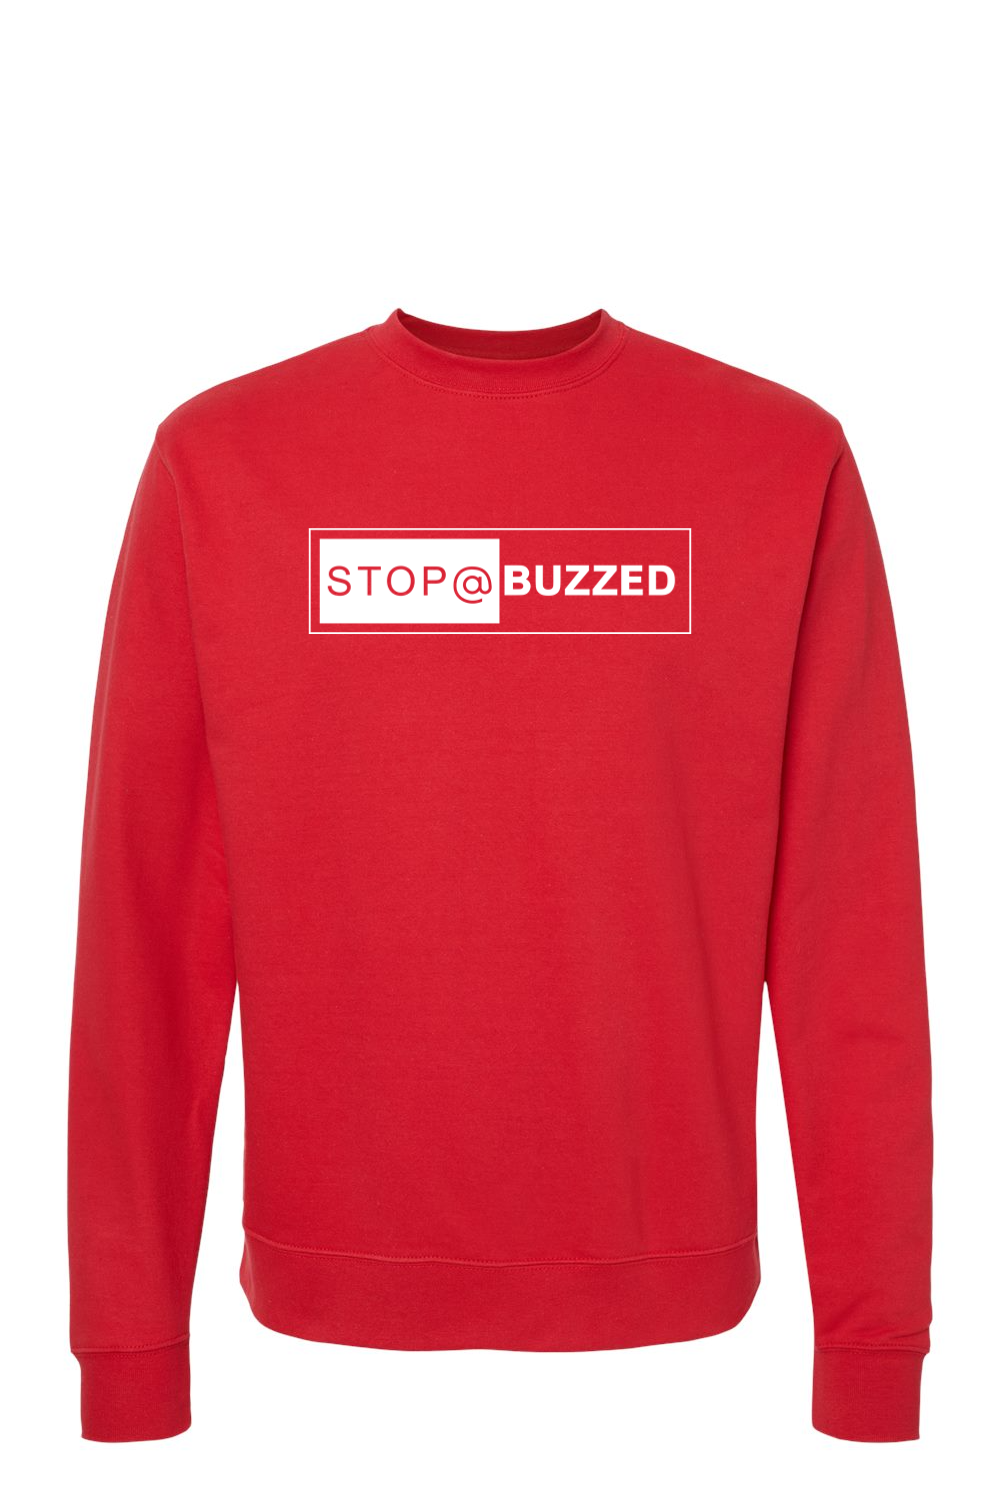 Stop @ buzzed Independent Trading Co. Midweight Sweatshirt